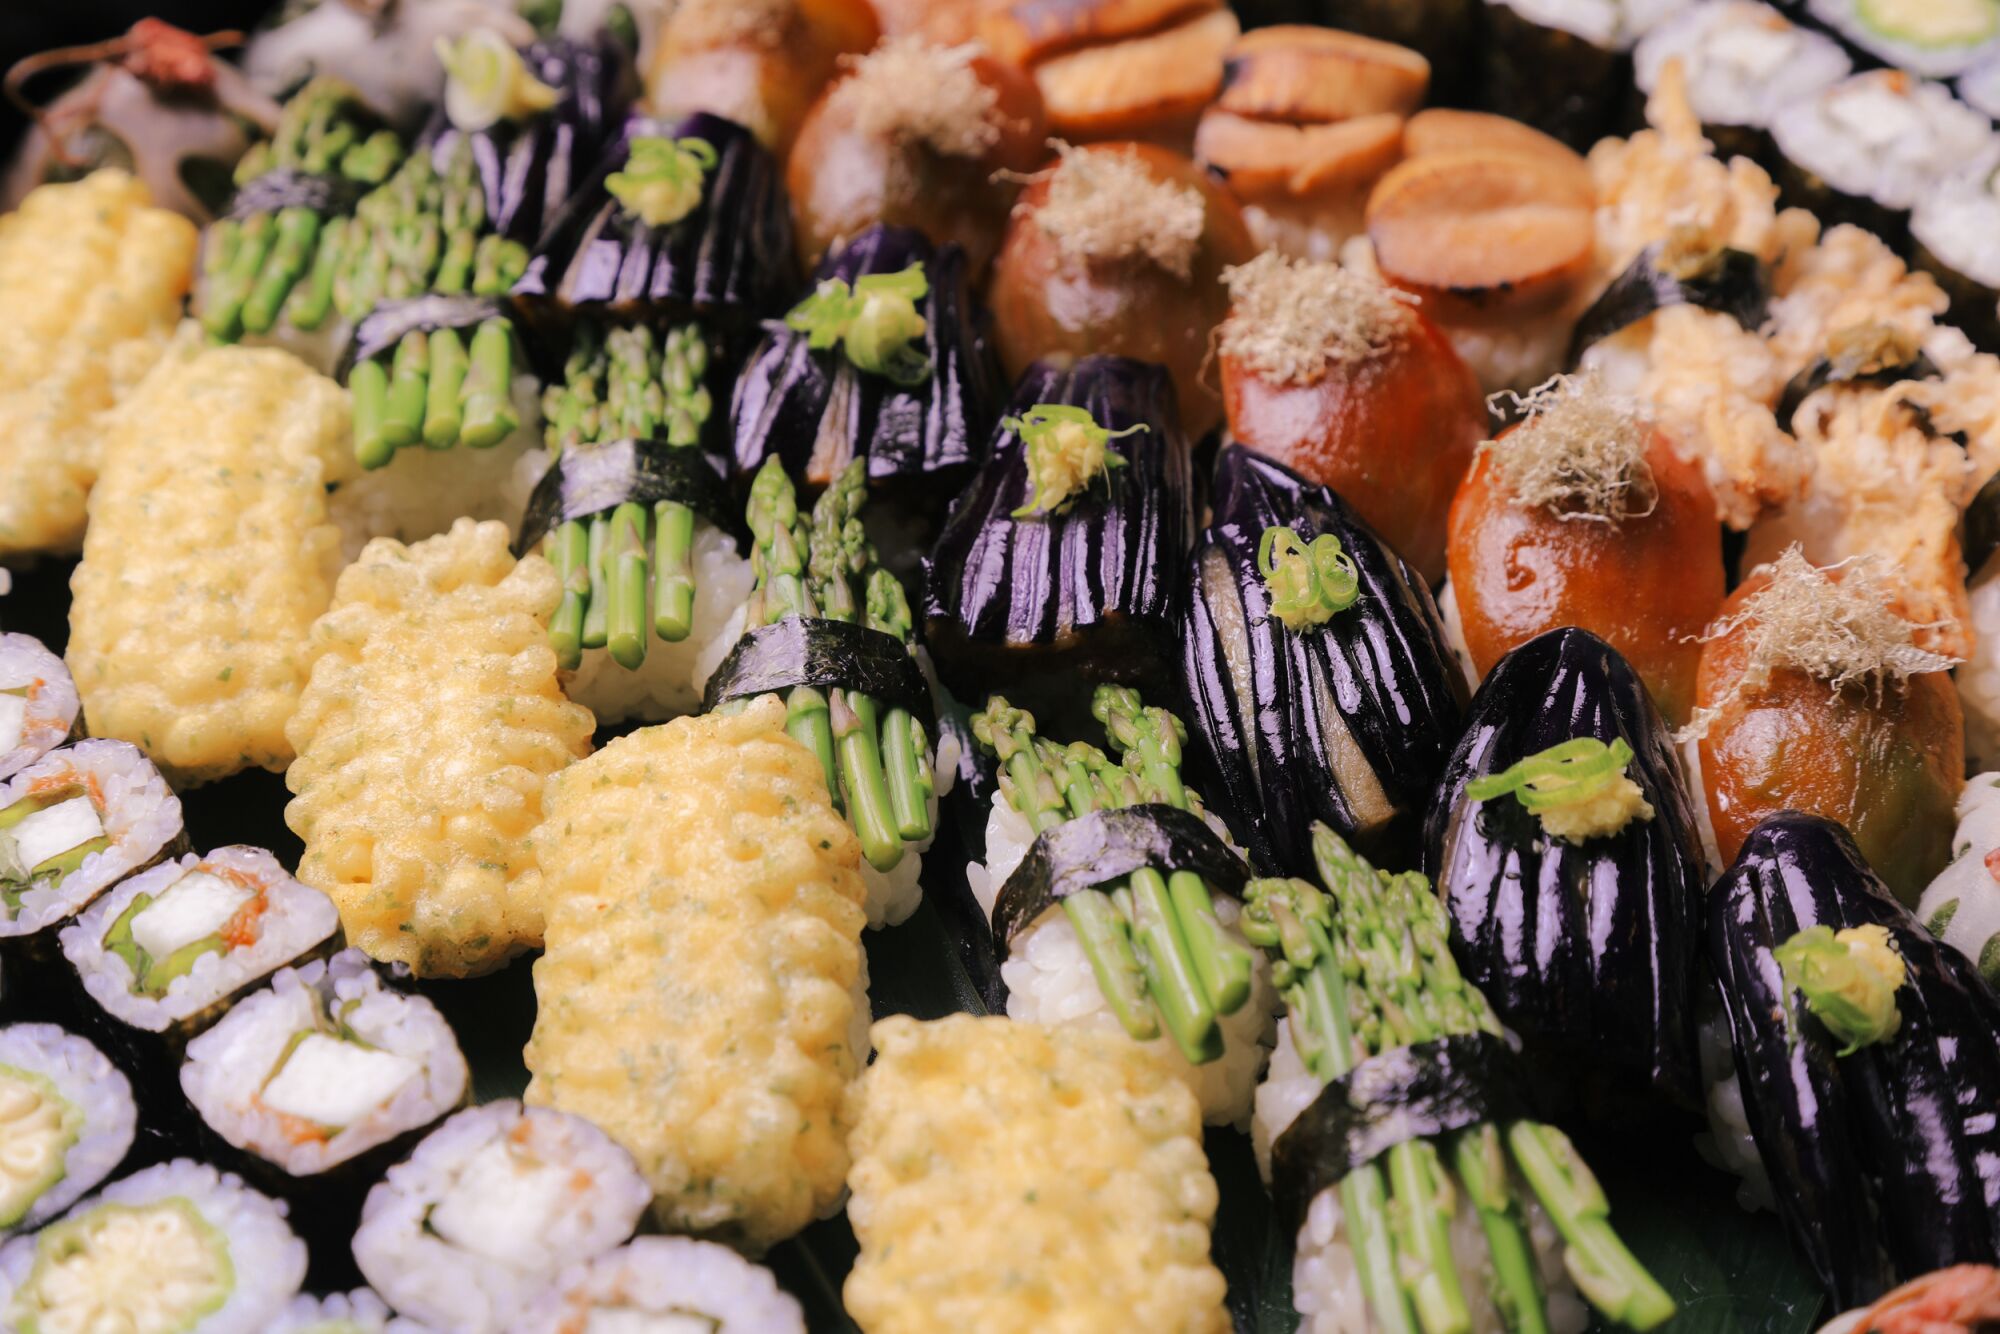 Rows of sushi topped with corn, eggplant, asparagus and other vegetables.